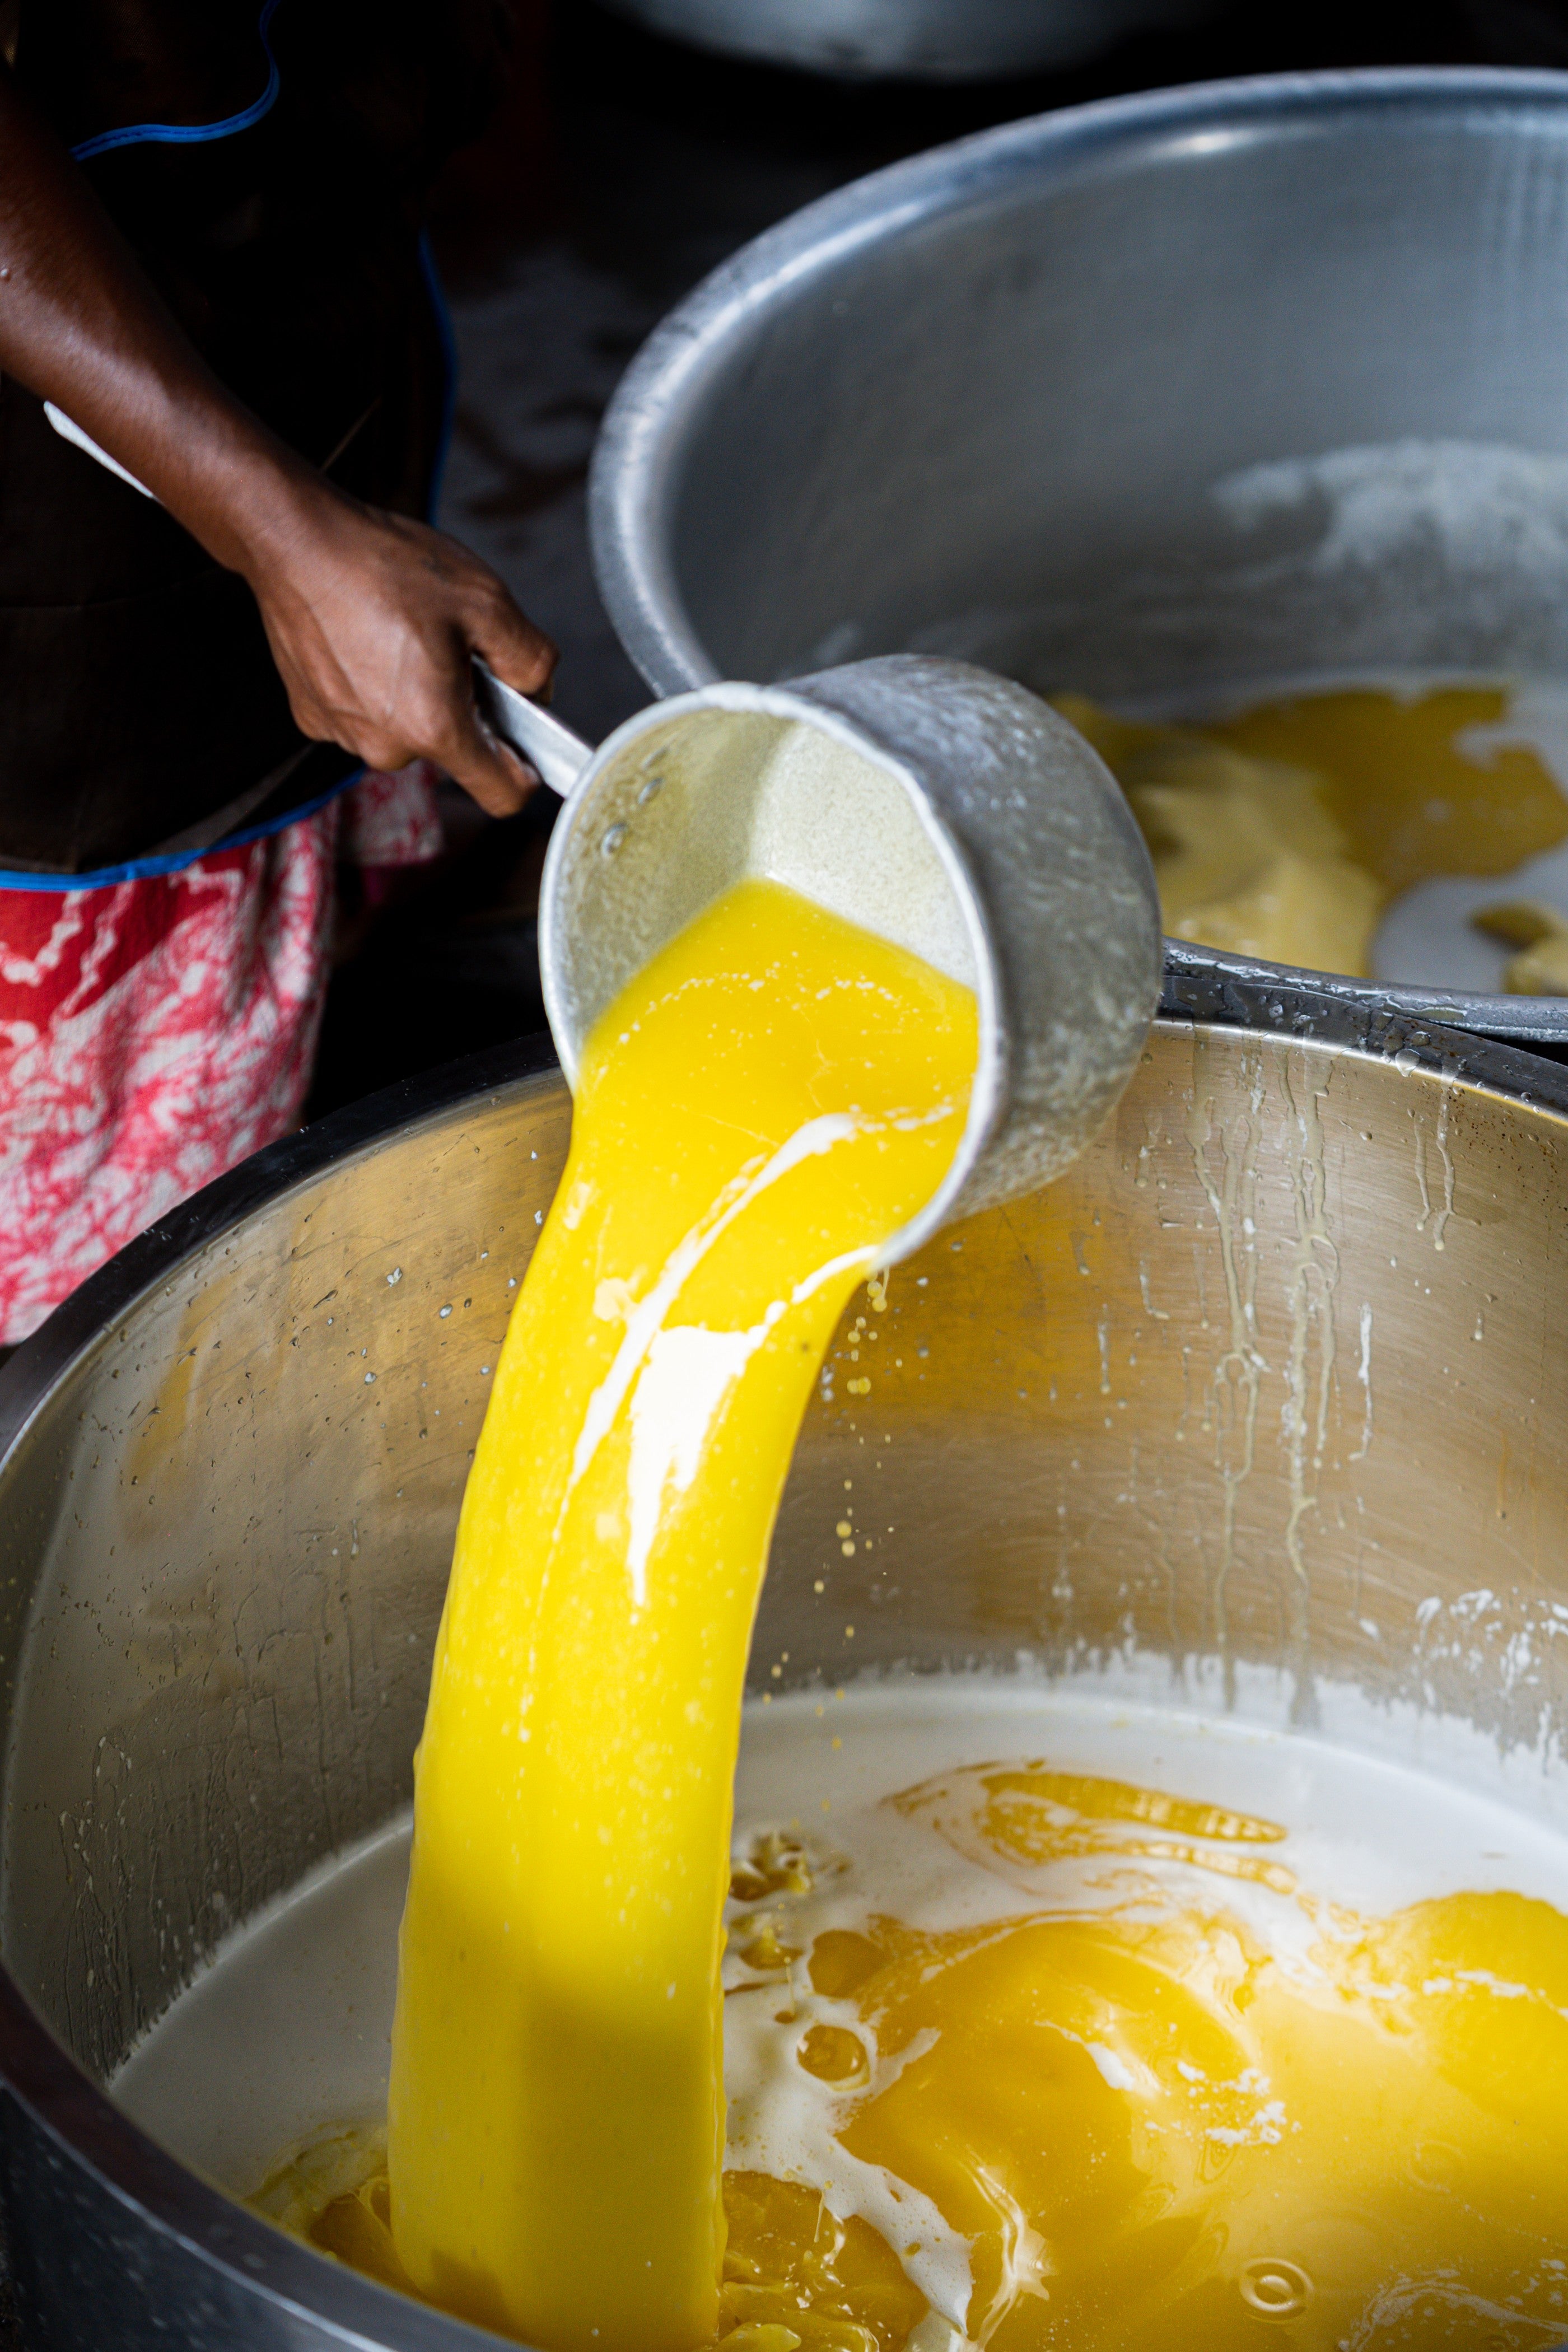 Making of Desi Gir Cow Ghee, A2 Ghee, Cultured Ghee at Two Brothers Organic Farms